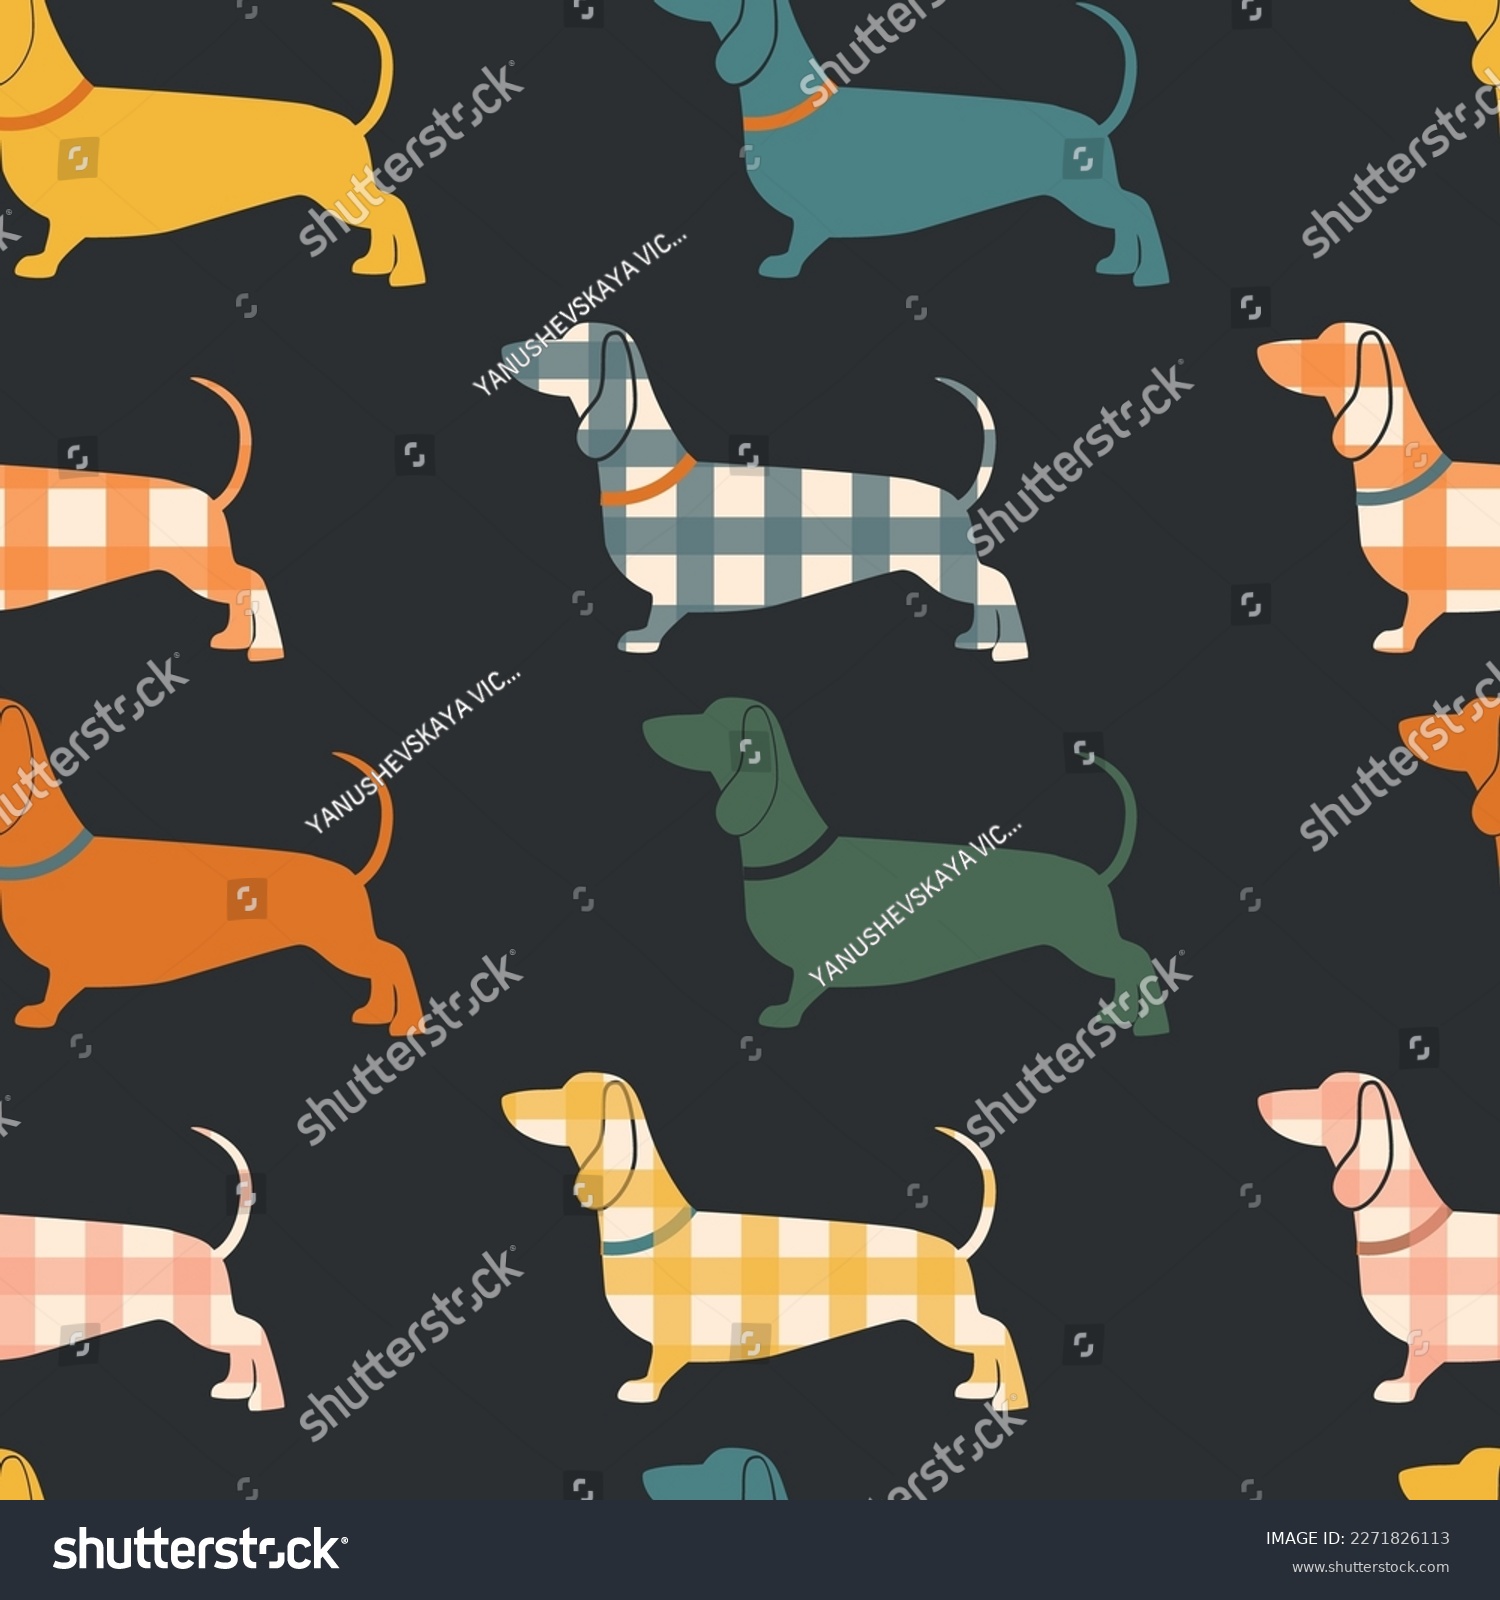 SVG of Seamless pattern with colorful dachshunds. Vector illustration. svg